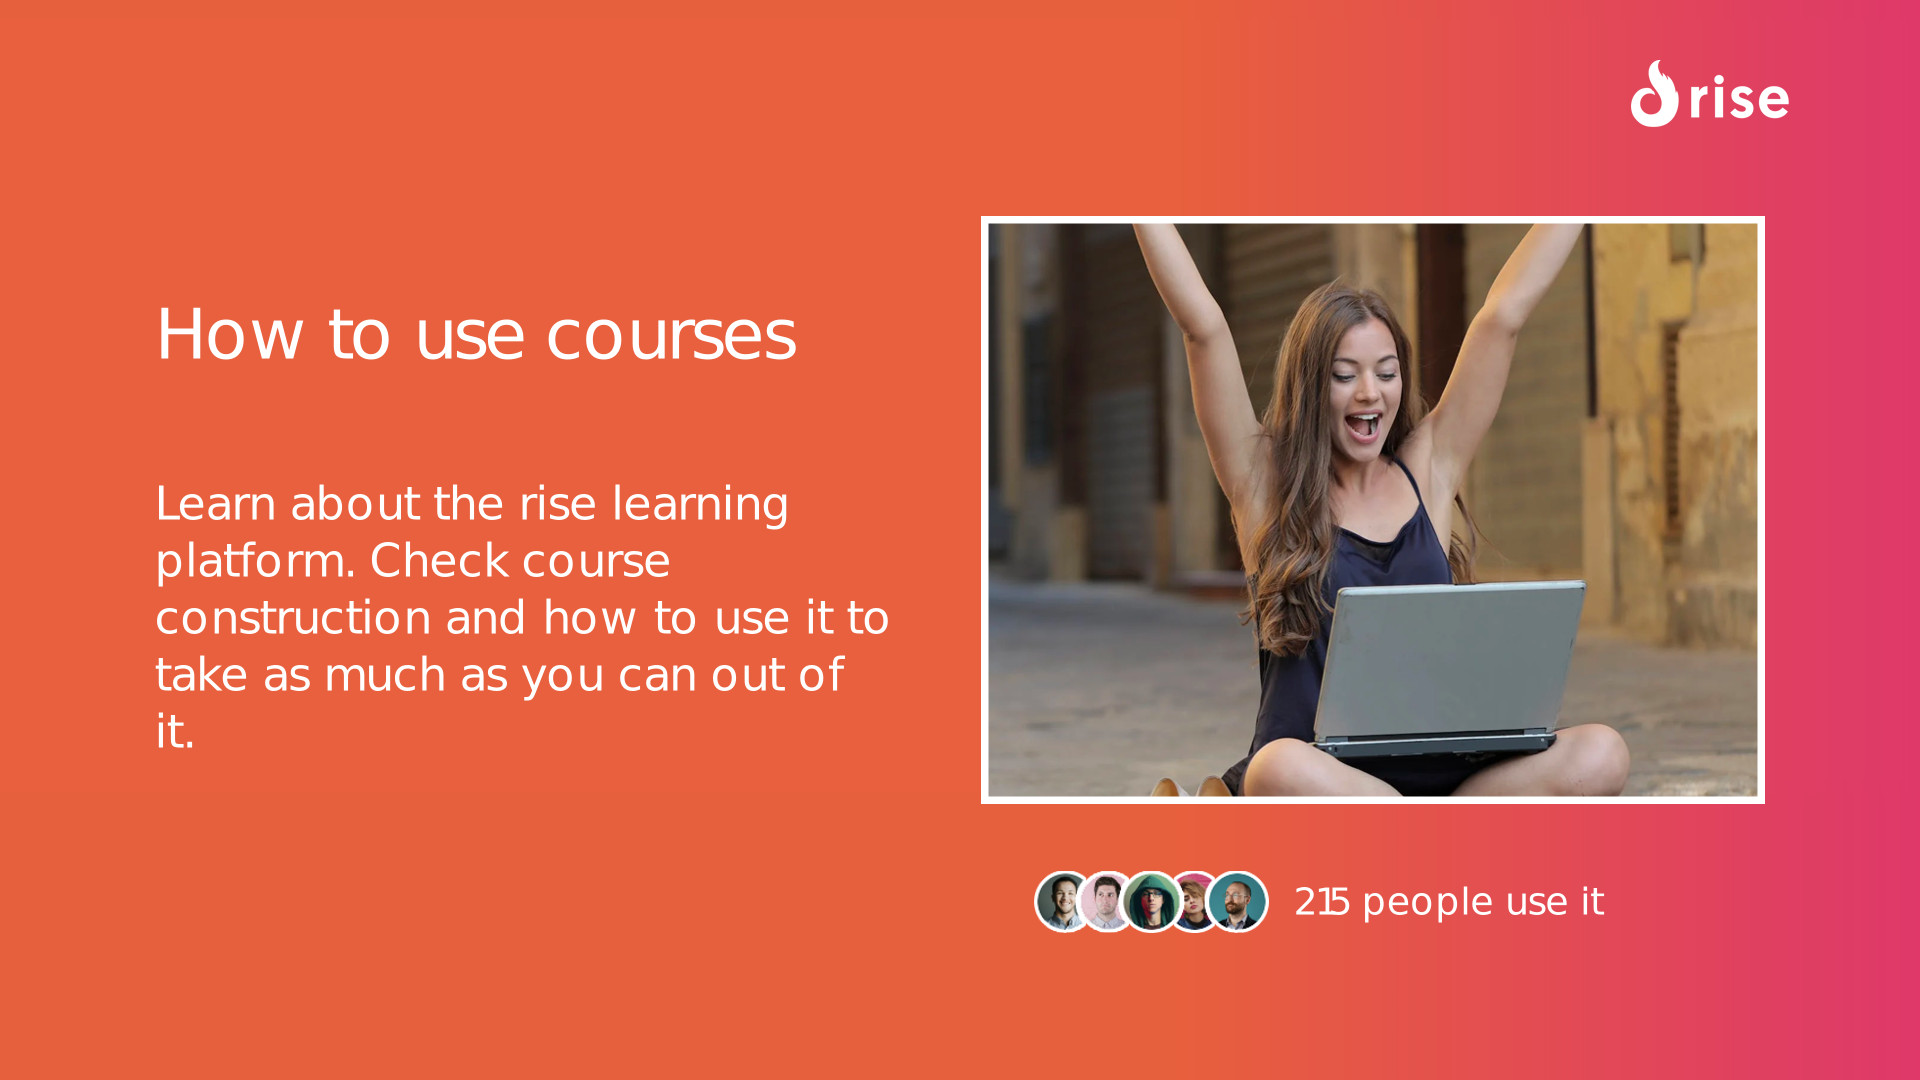 How to use courses